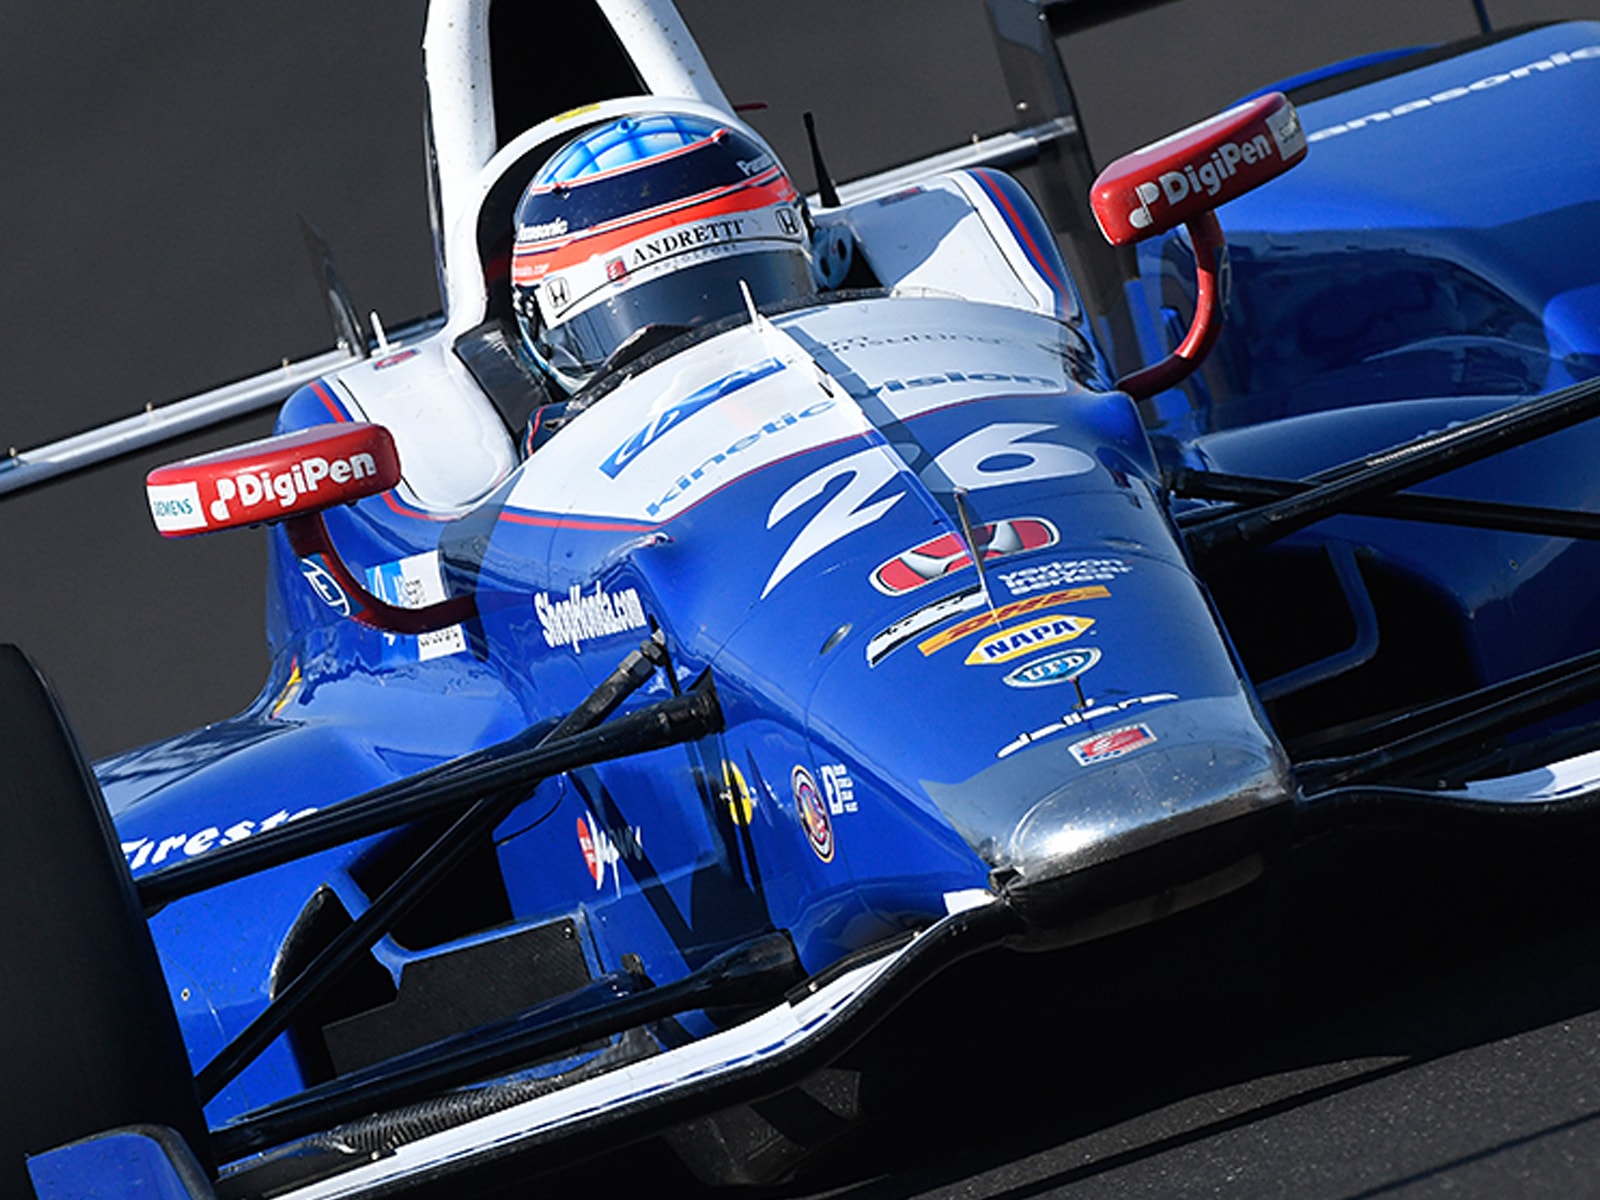 Takumo Sato driving an Indy car featuring the DigiPen logo